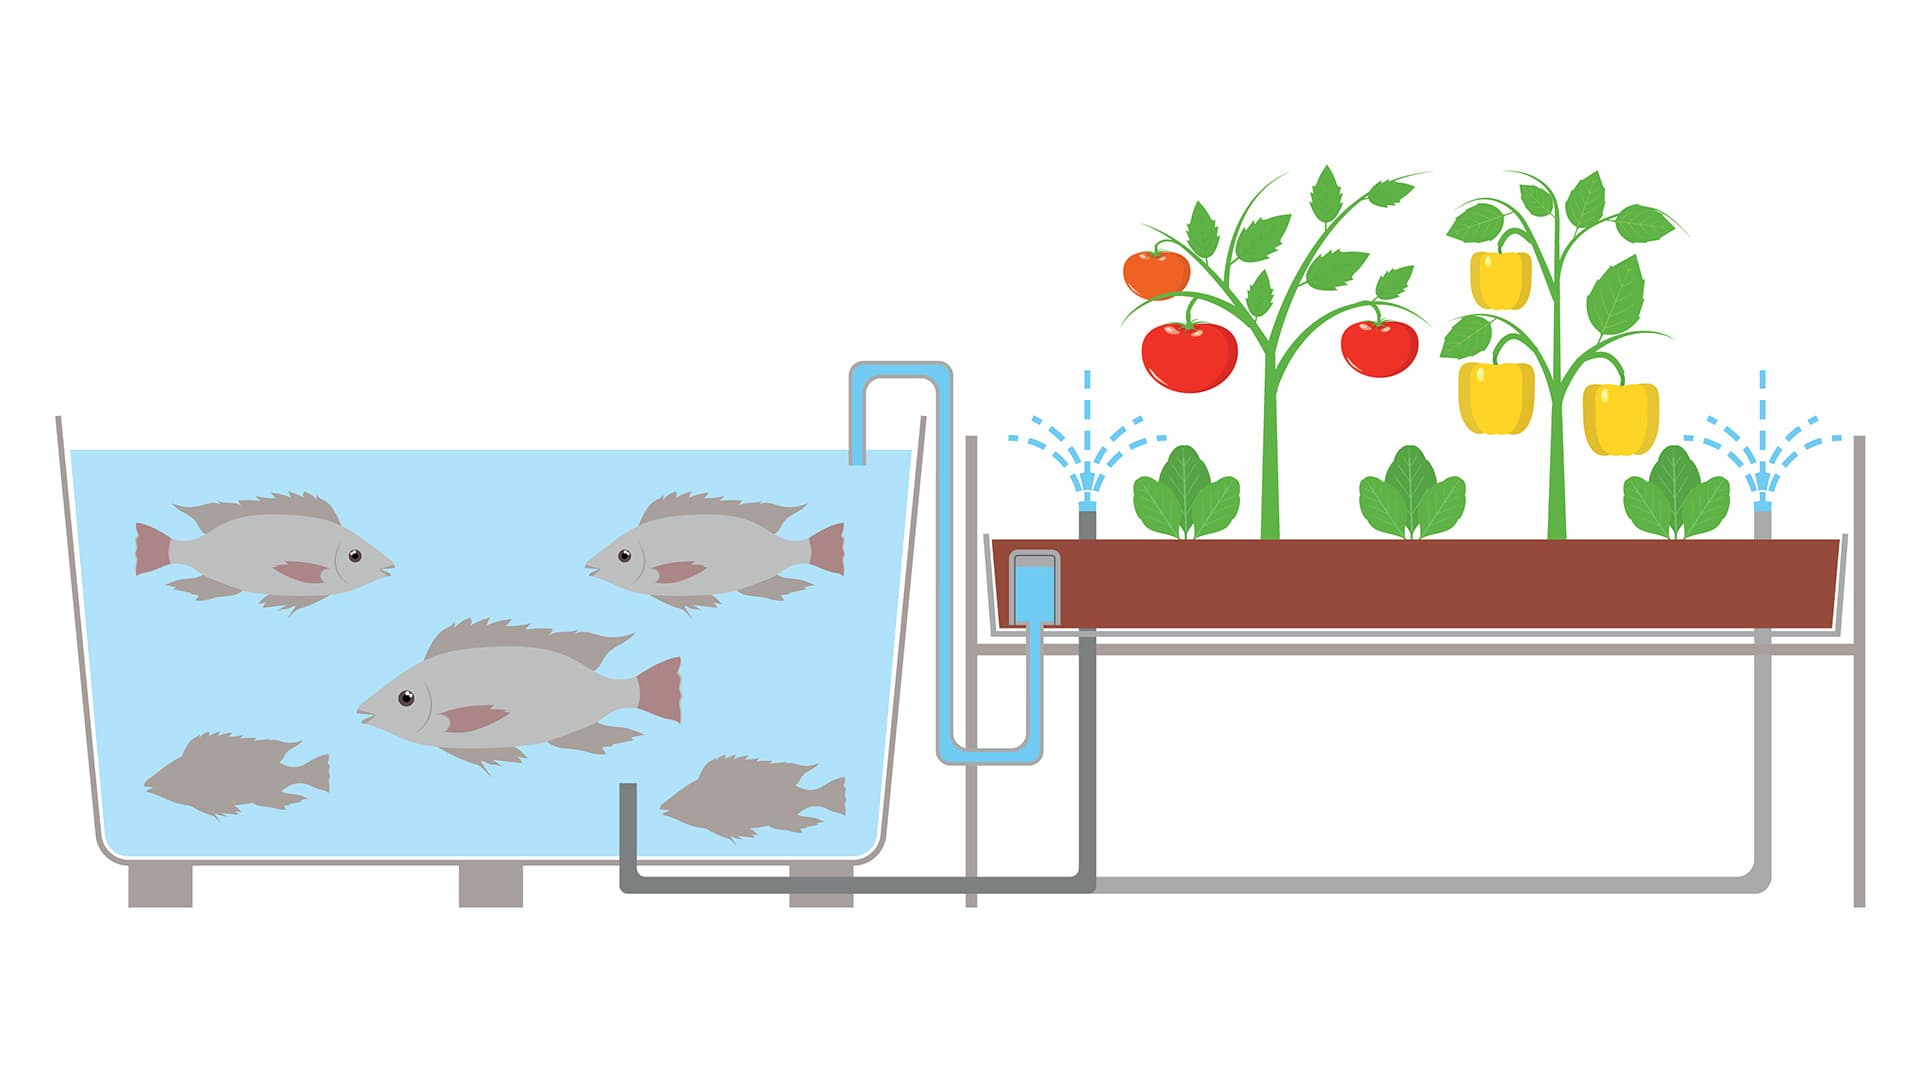 Illustration of fish and plants growing in an aquaponics system